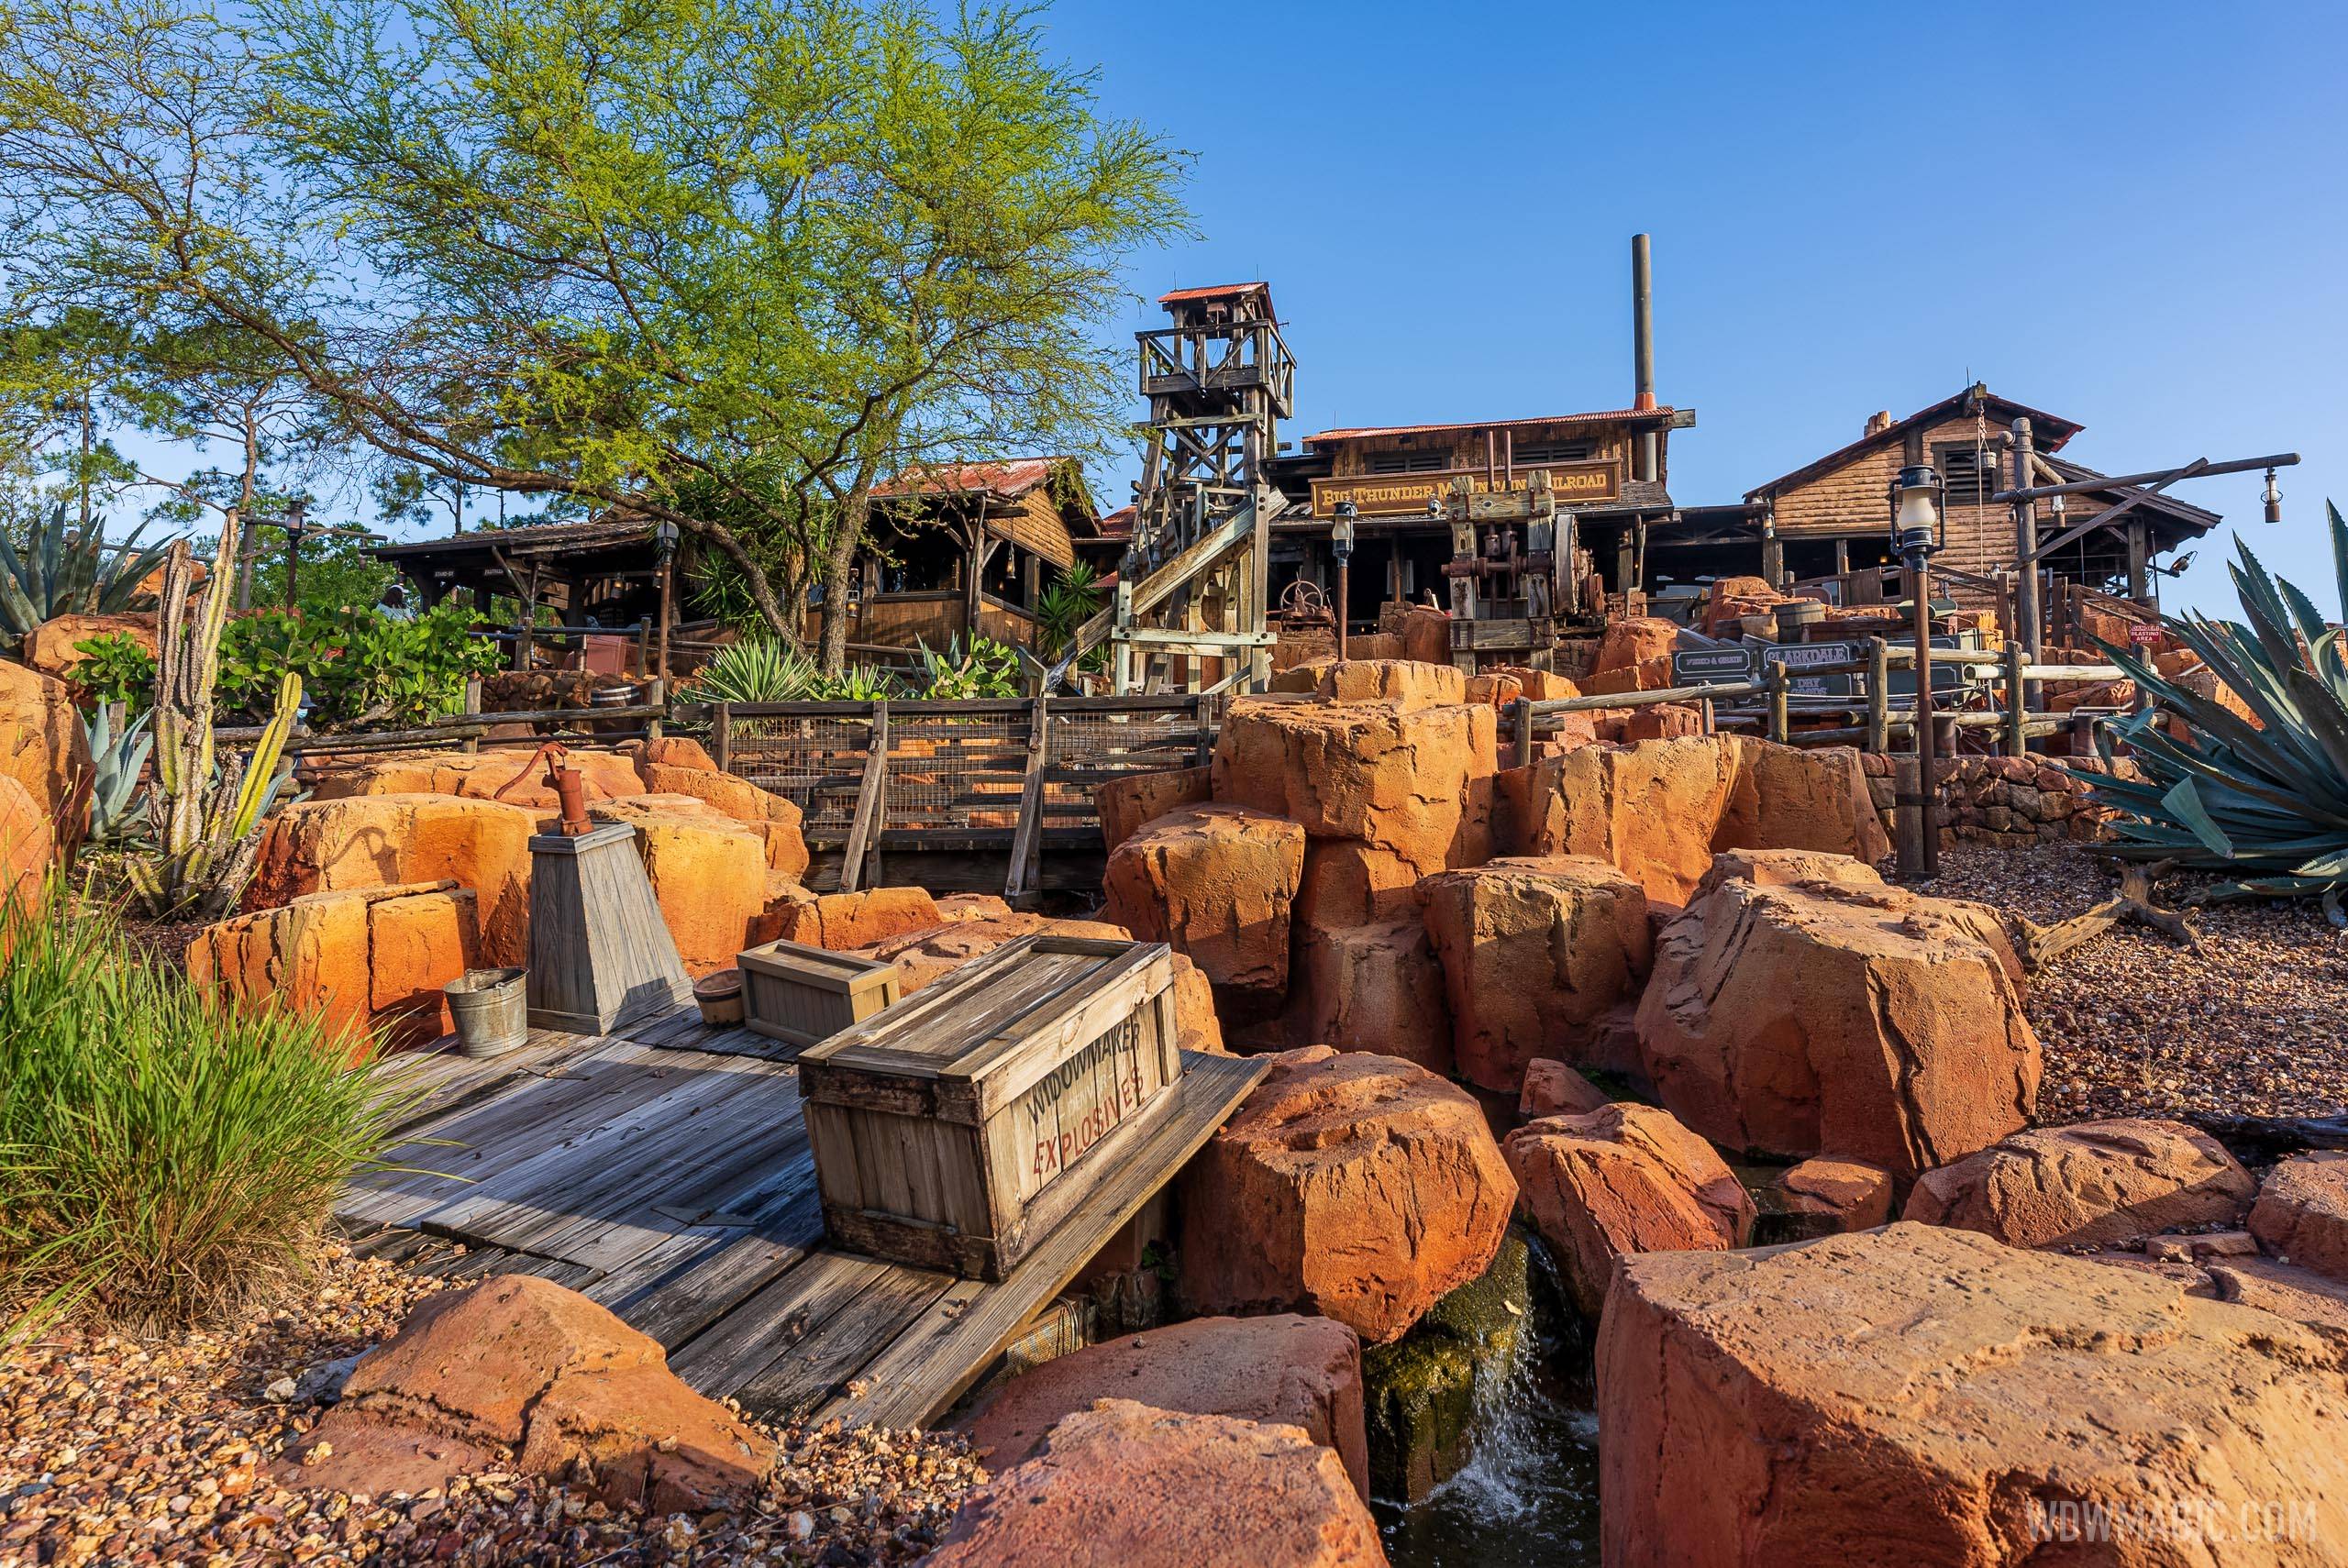 Big Thunder Mountain Railroad refurbishment moved back to later in the year